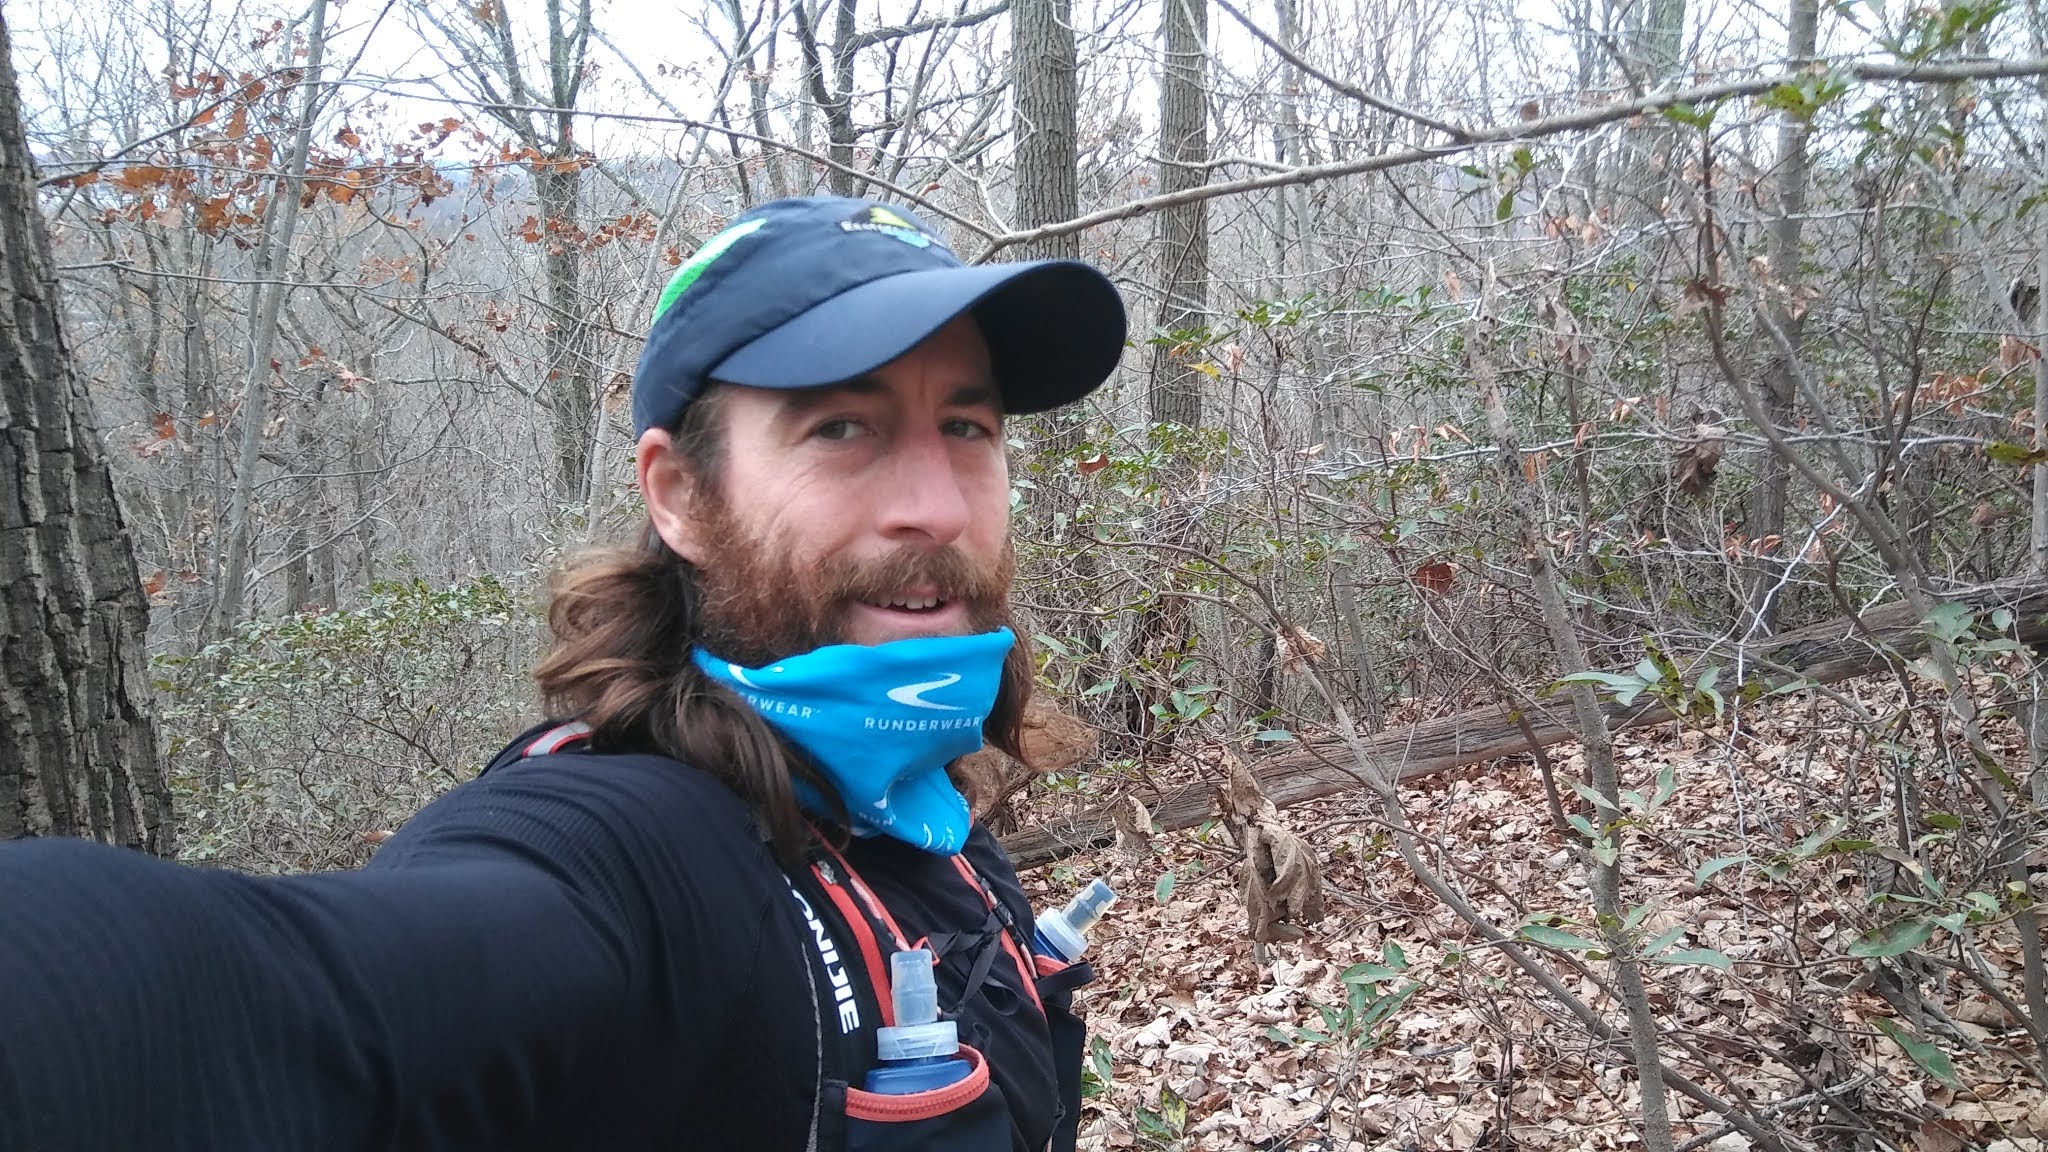 Beast Coast Trail Running by Scott Snell: Runderwear Winter Gear Review -  Base Layer and Neck Warmer